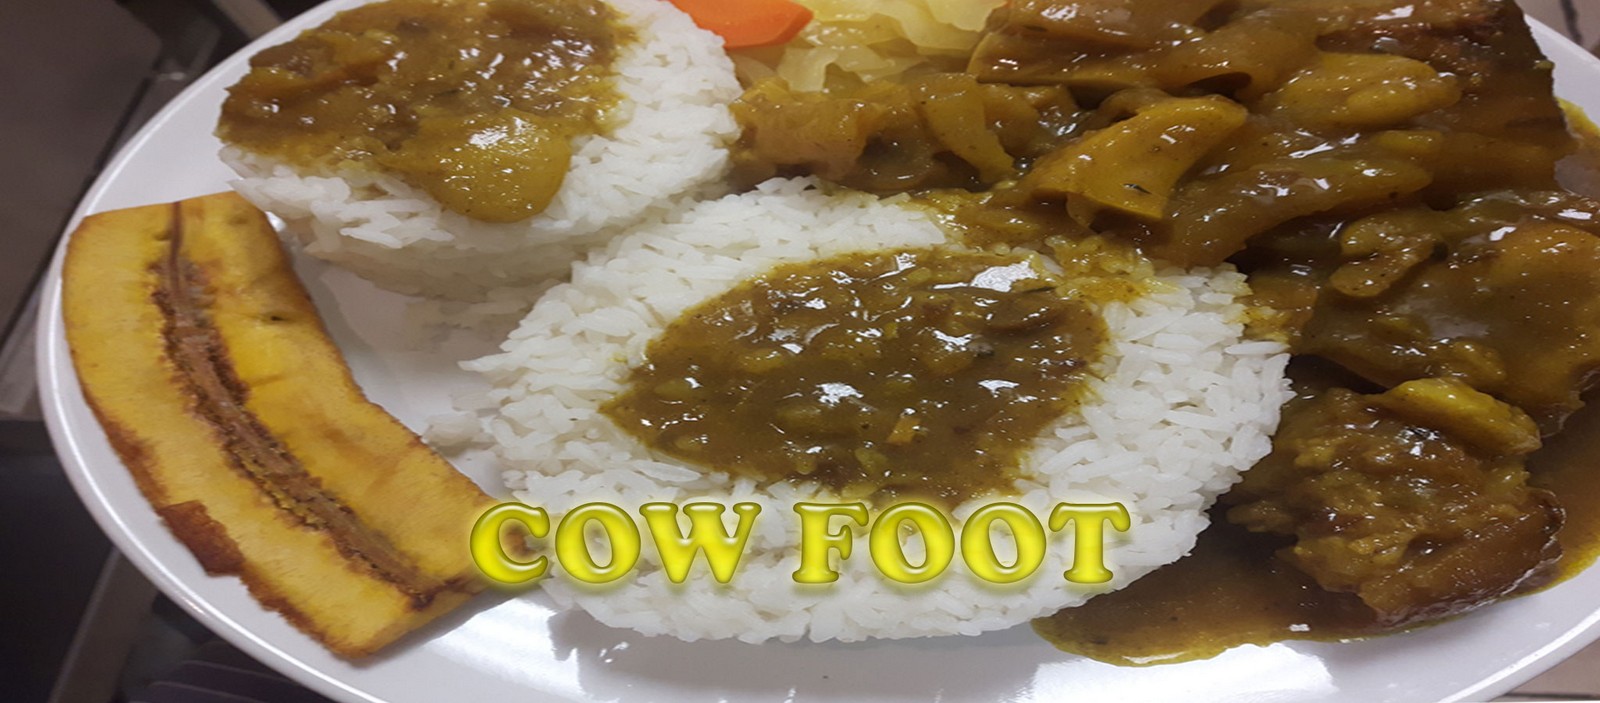 COW FOOT